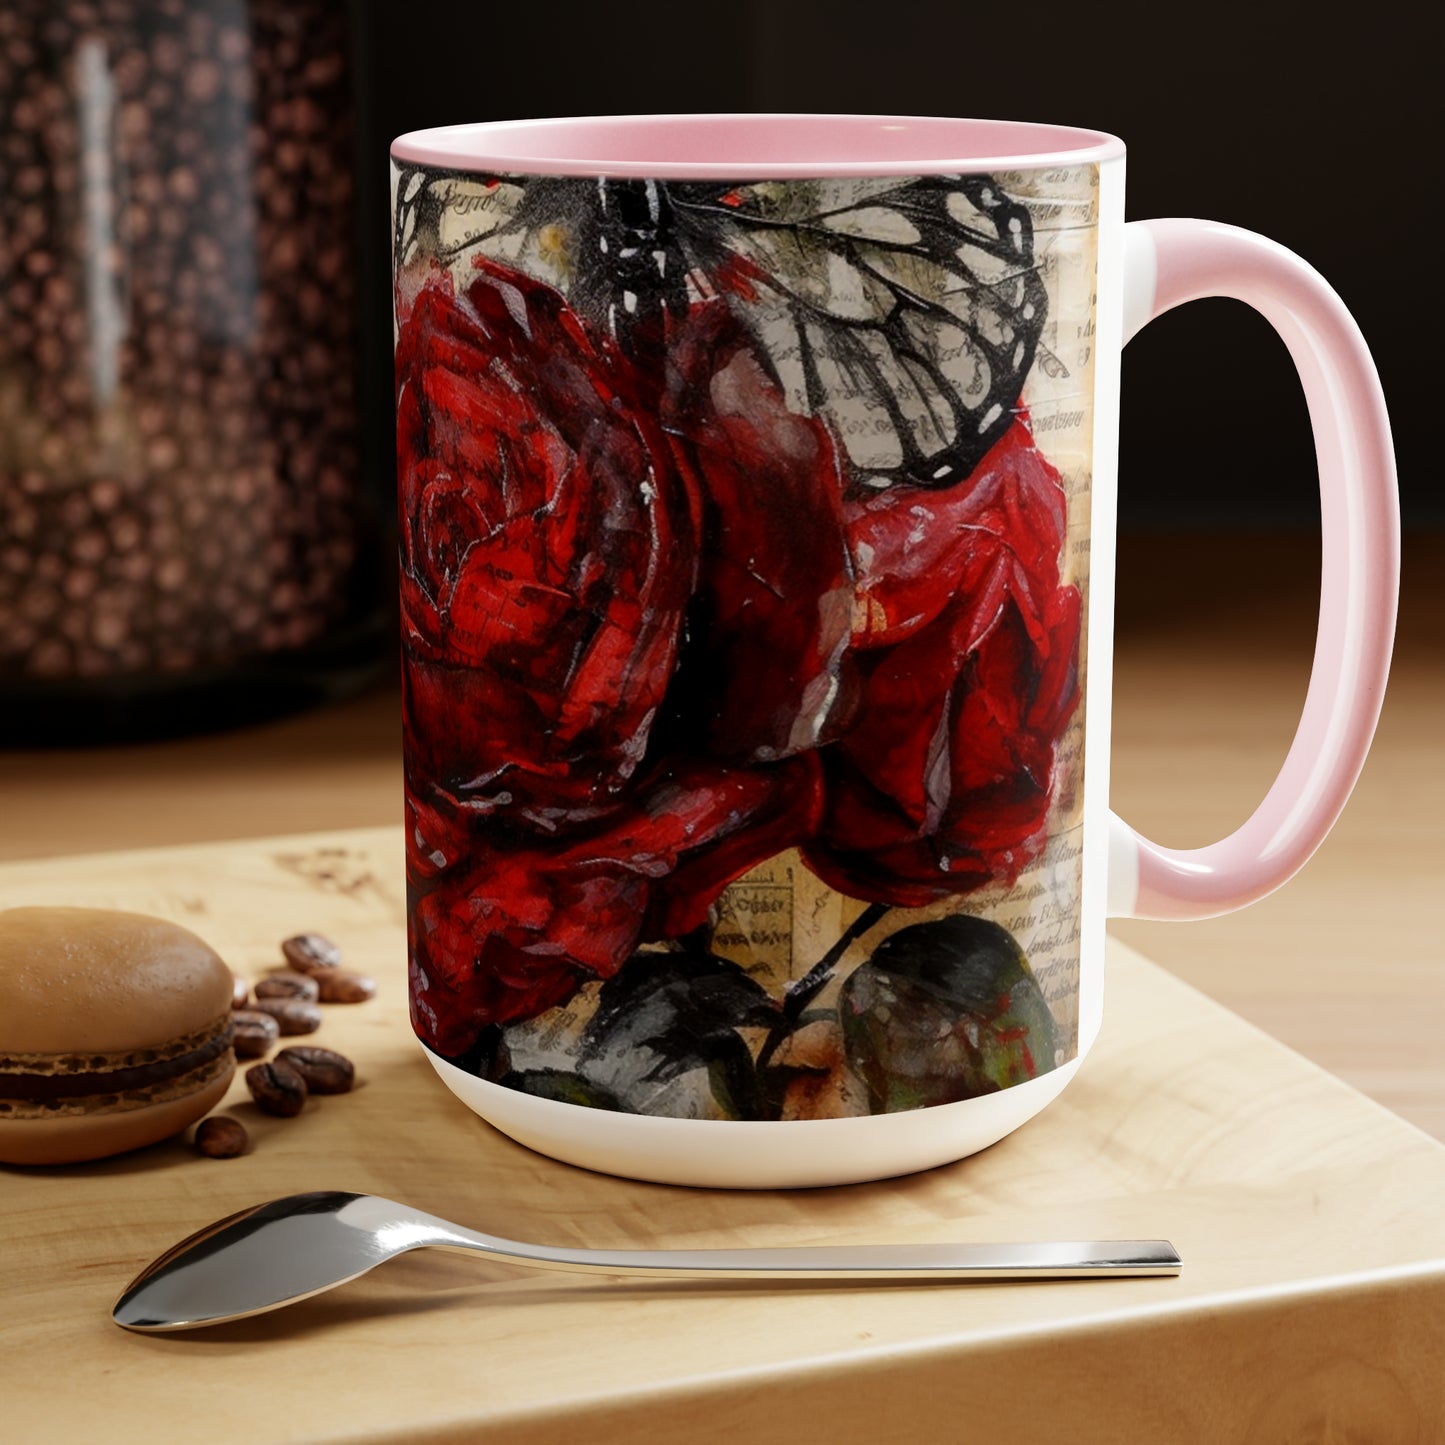 Two-Tone Coffee Mugs, 15oz, Red Rose with Butterfly - pink rim